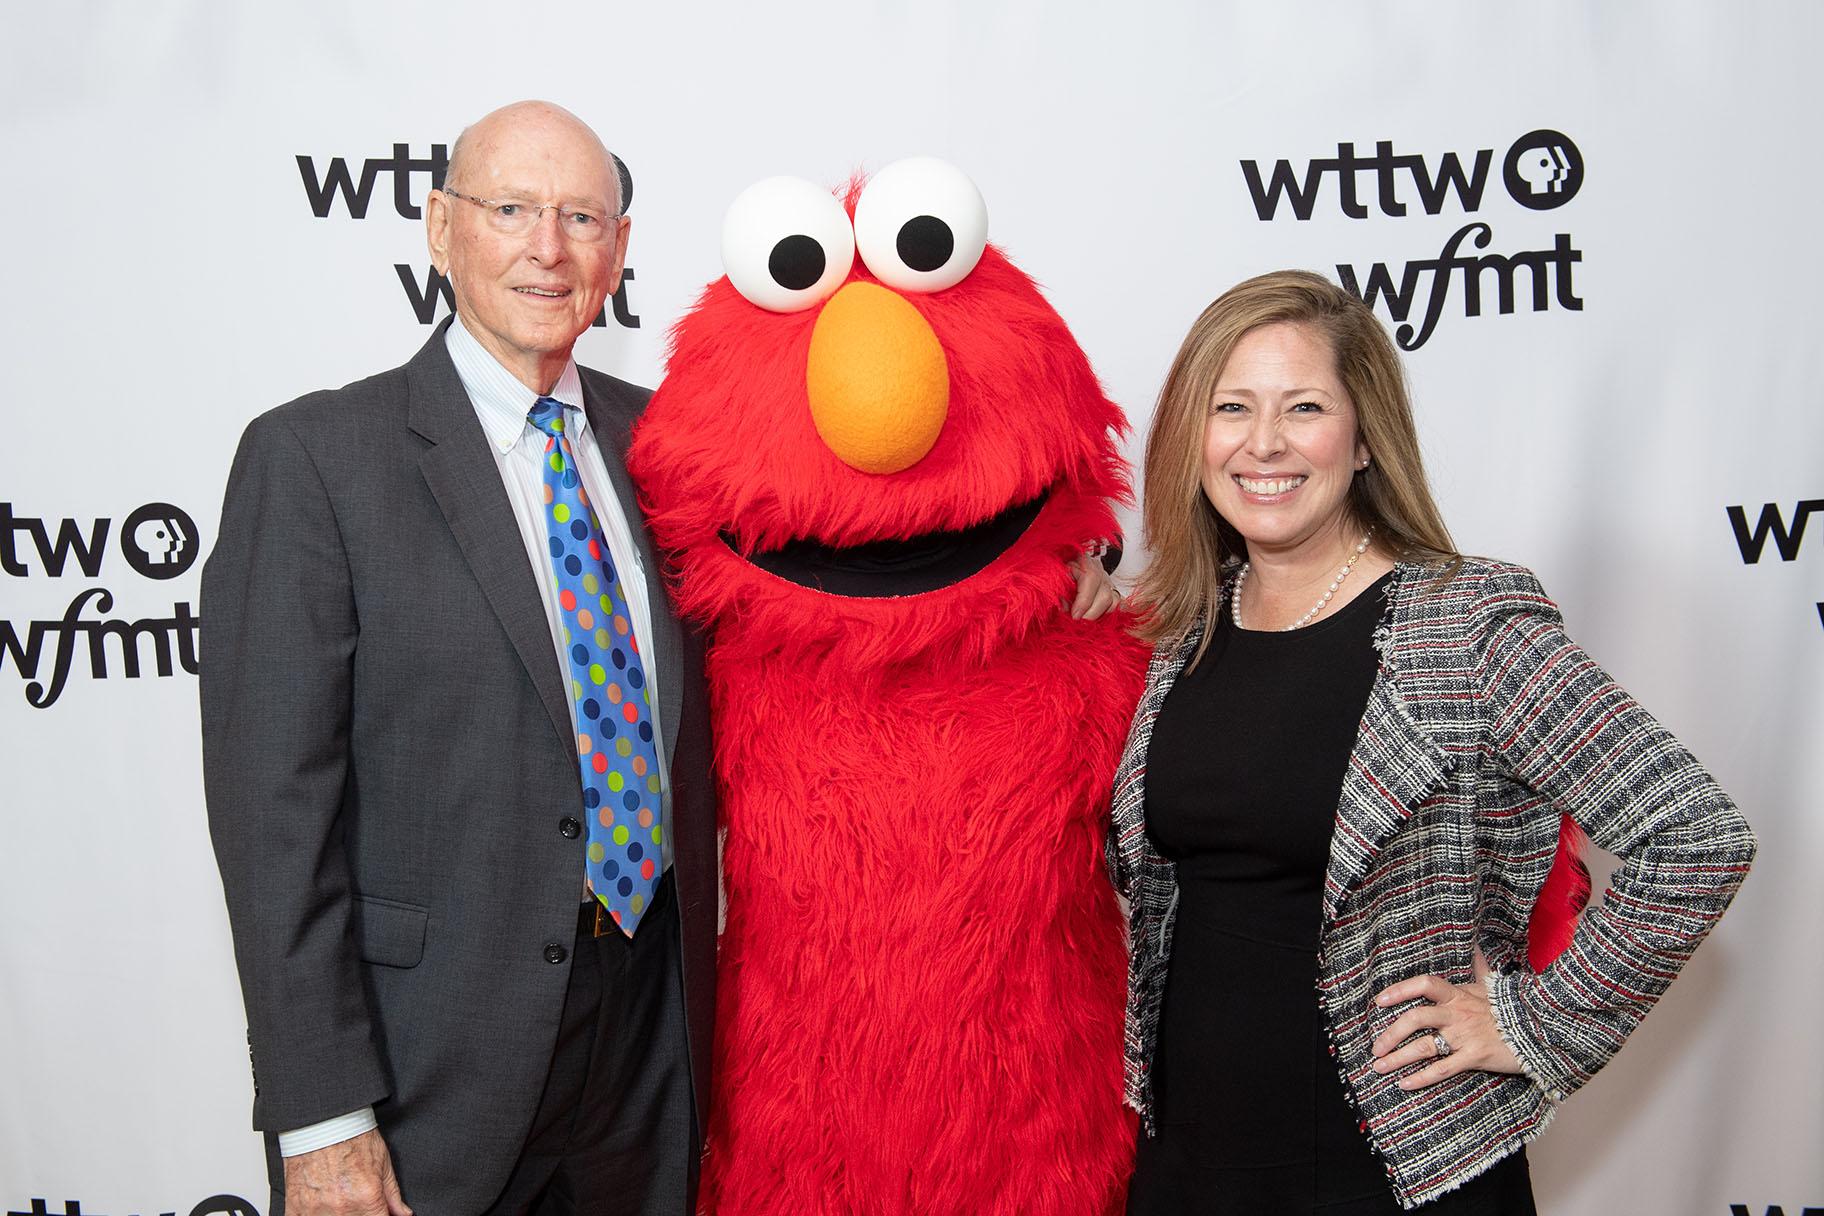 Jim Mabie and Sandra Cordova Micek, president and CEO of WTTW and WFMT, pose with Elmo from “Sesame Street.” (WTTW)